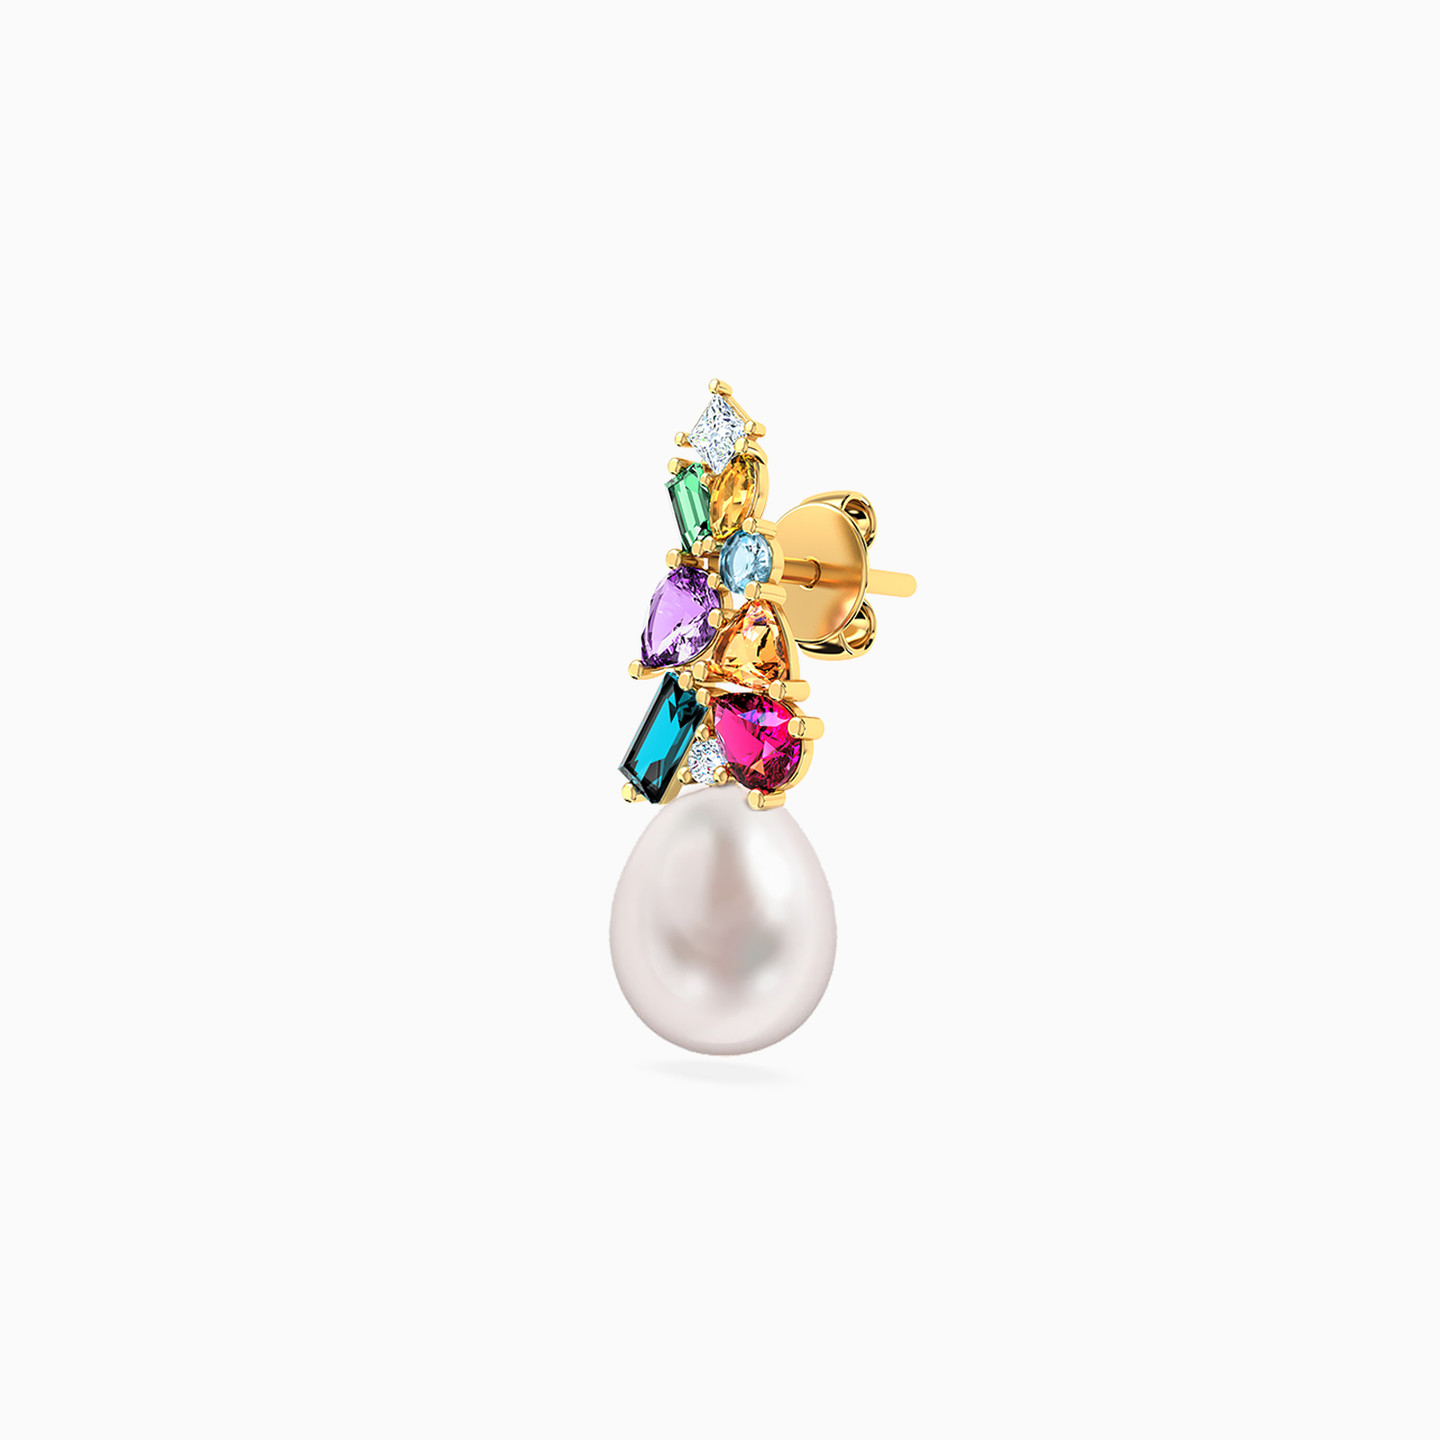 Multi-shaped Pearls & Colored Stones Stud Earrings in 18K Gold - 3